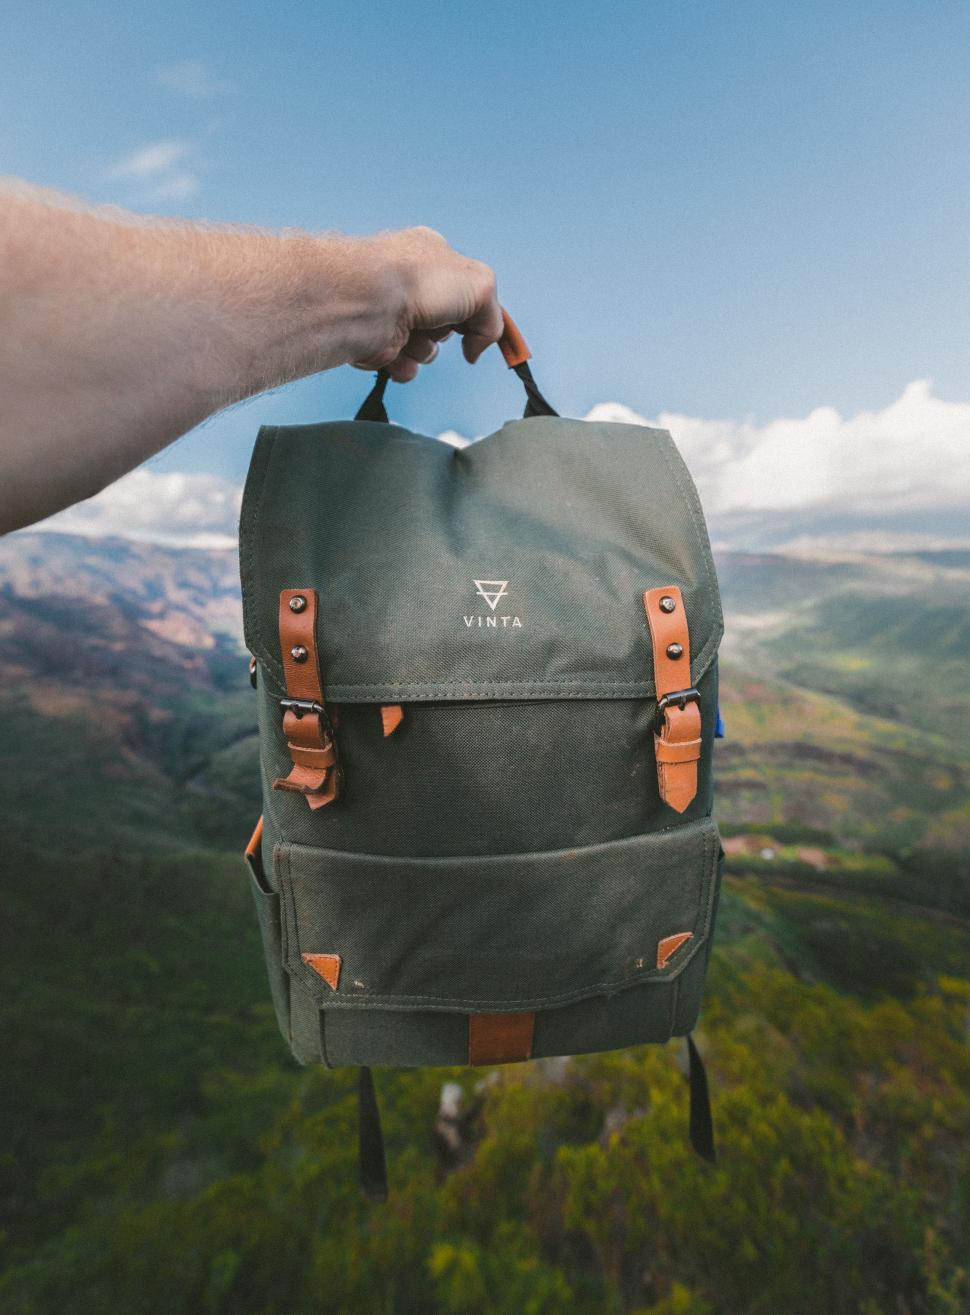 Free Image of Person Holding a Backpack 